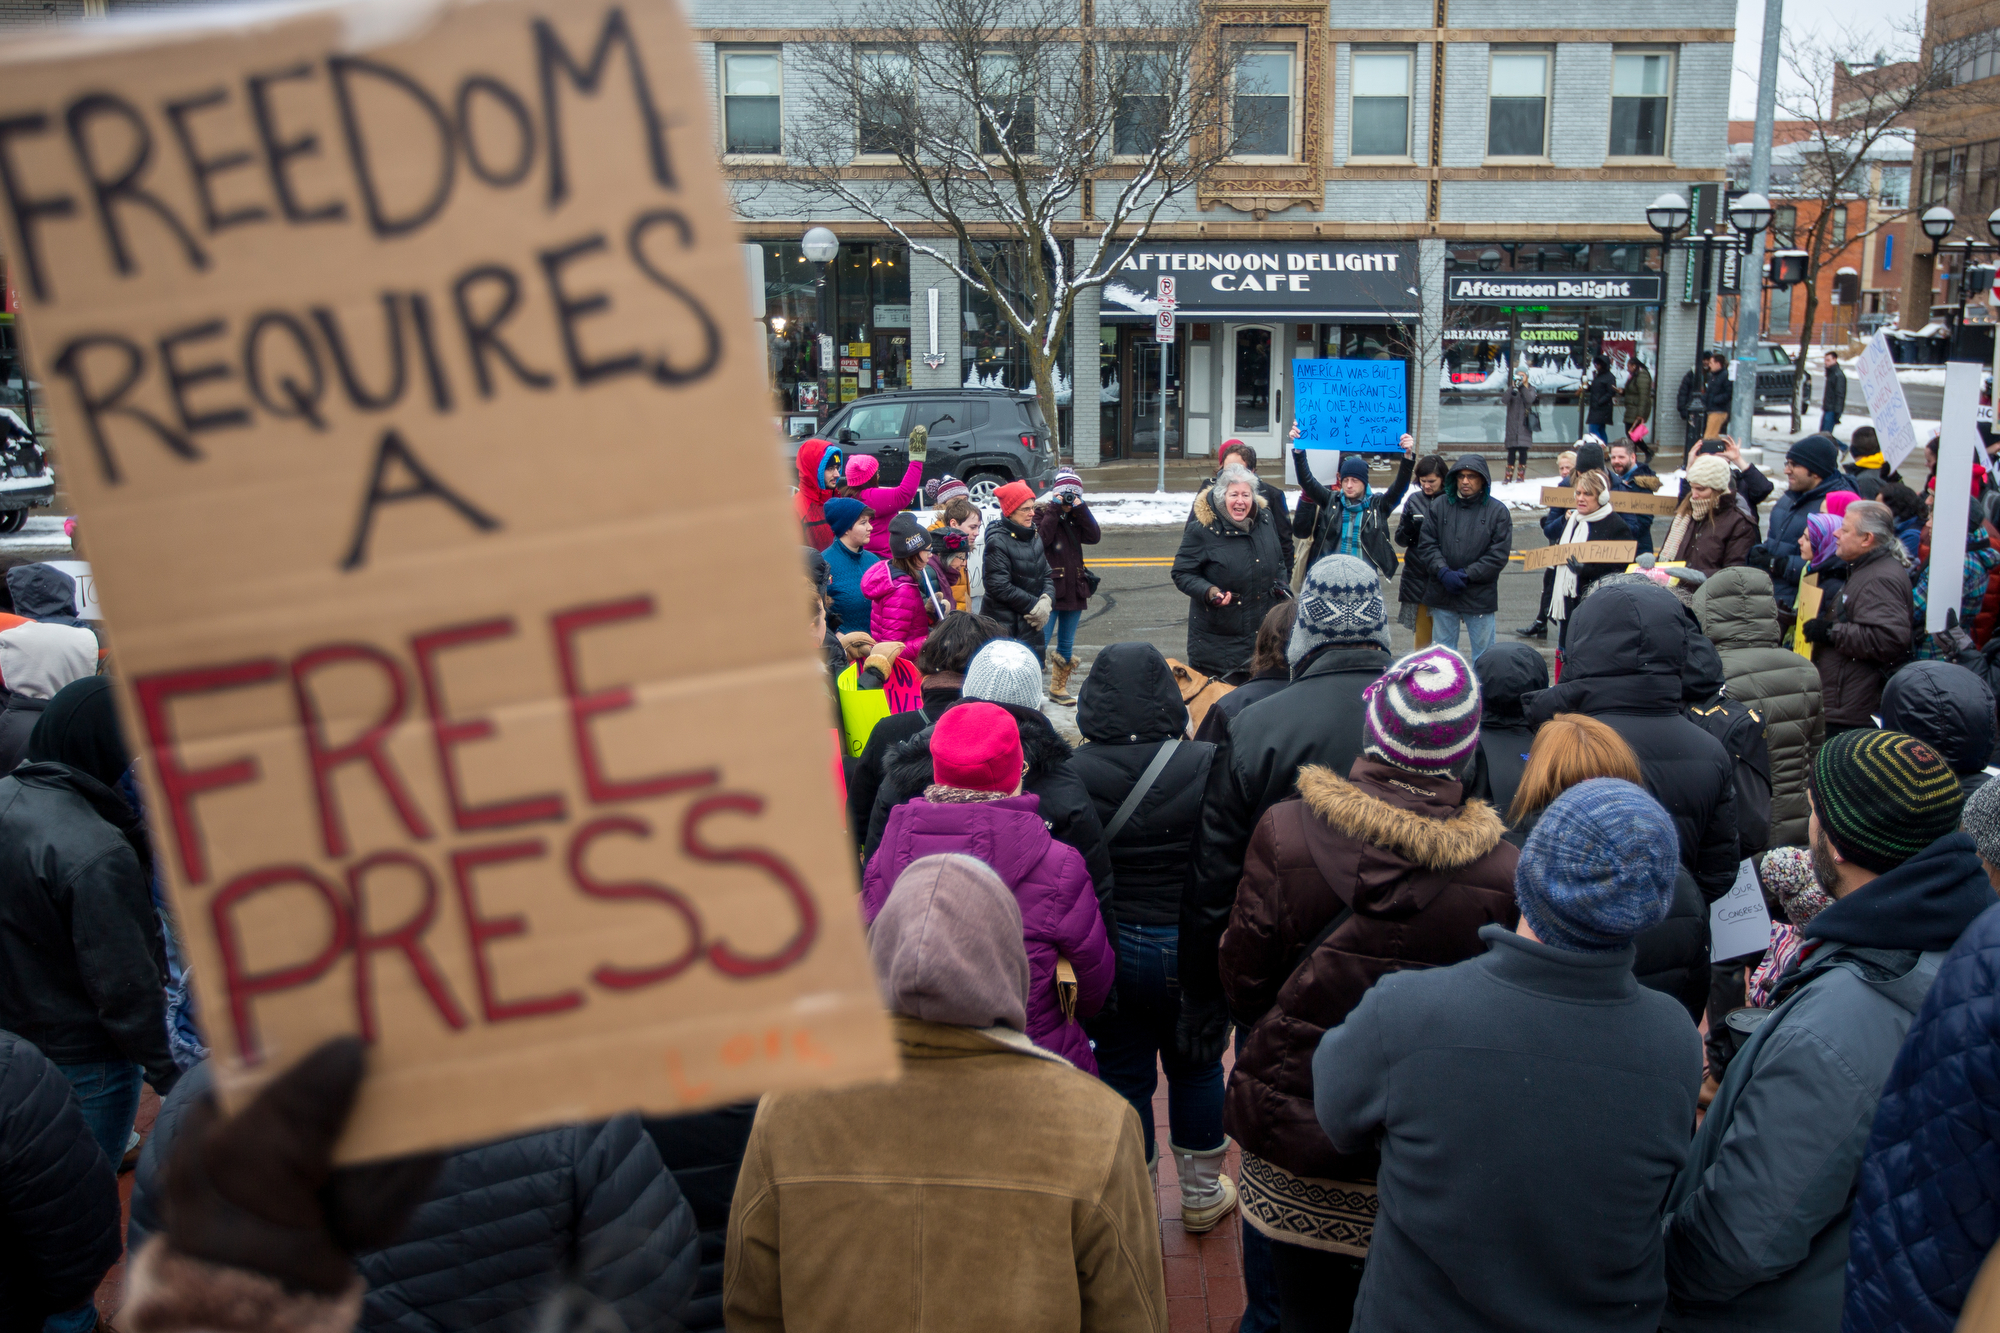  People gather outside of the federal Building in downtown Ann Arbor to protest President Trump's anti-immigration policy on Sunday, January 29, 2017. About 200 people attended the protest. Matt Weigand | The Ann Arbor News 